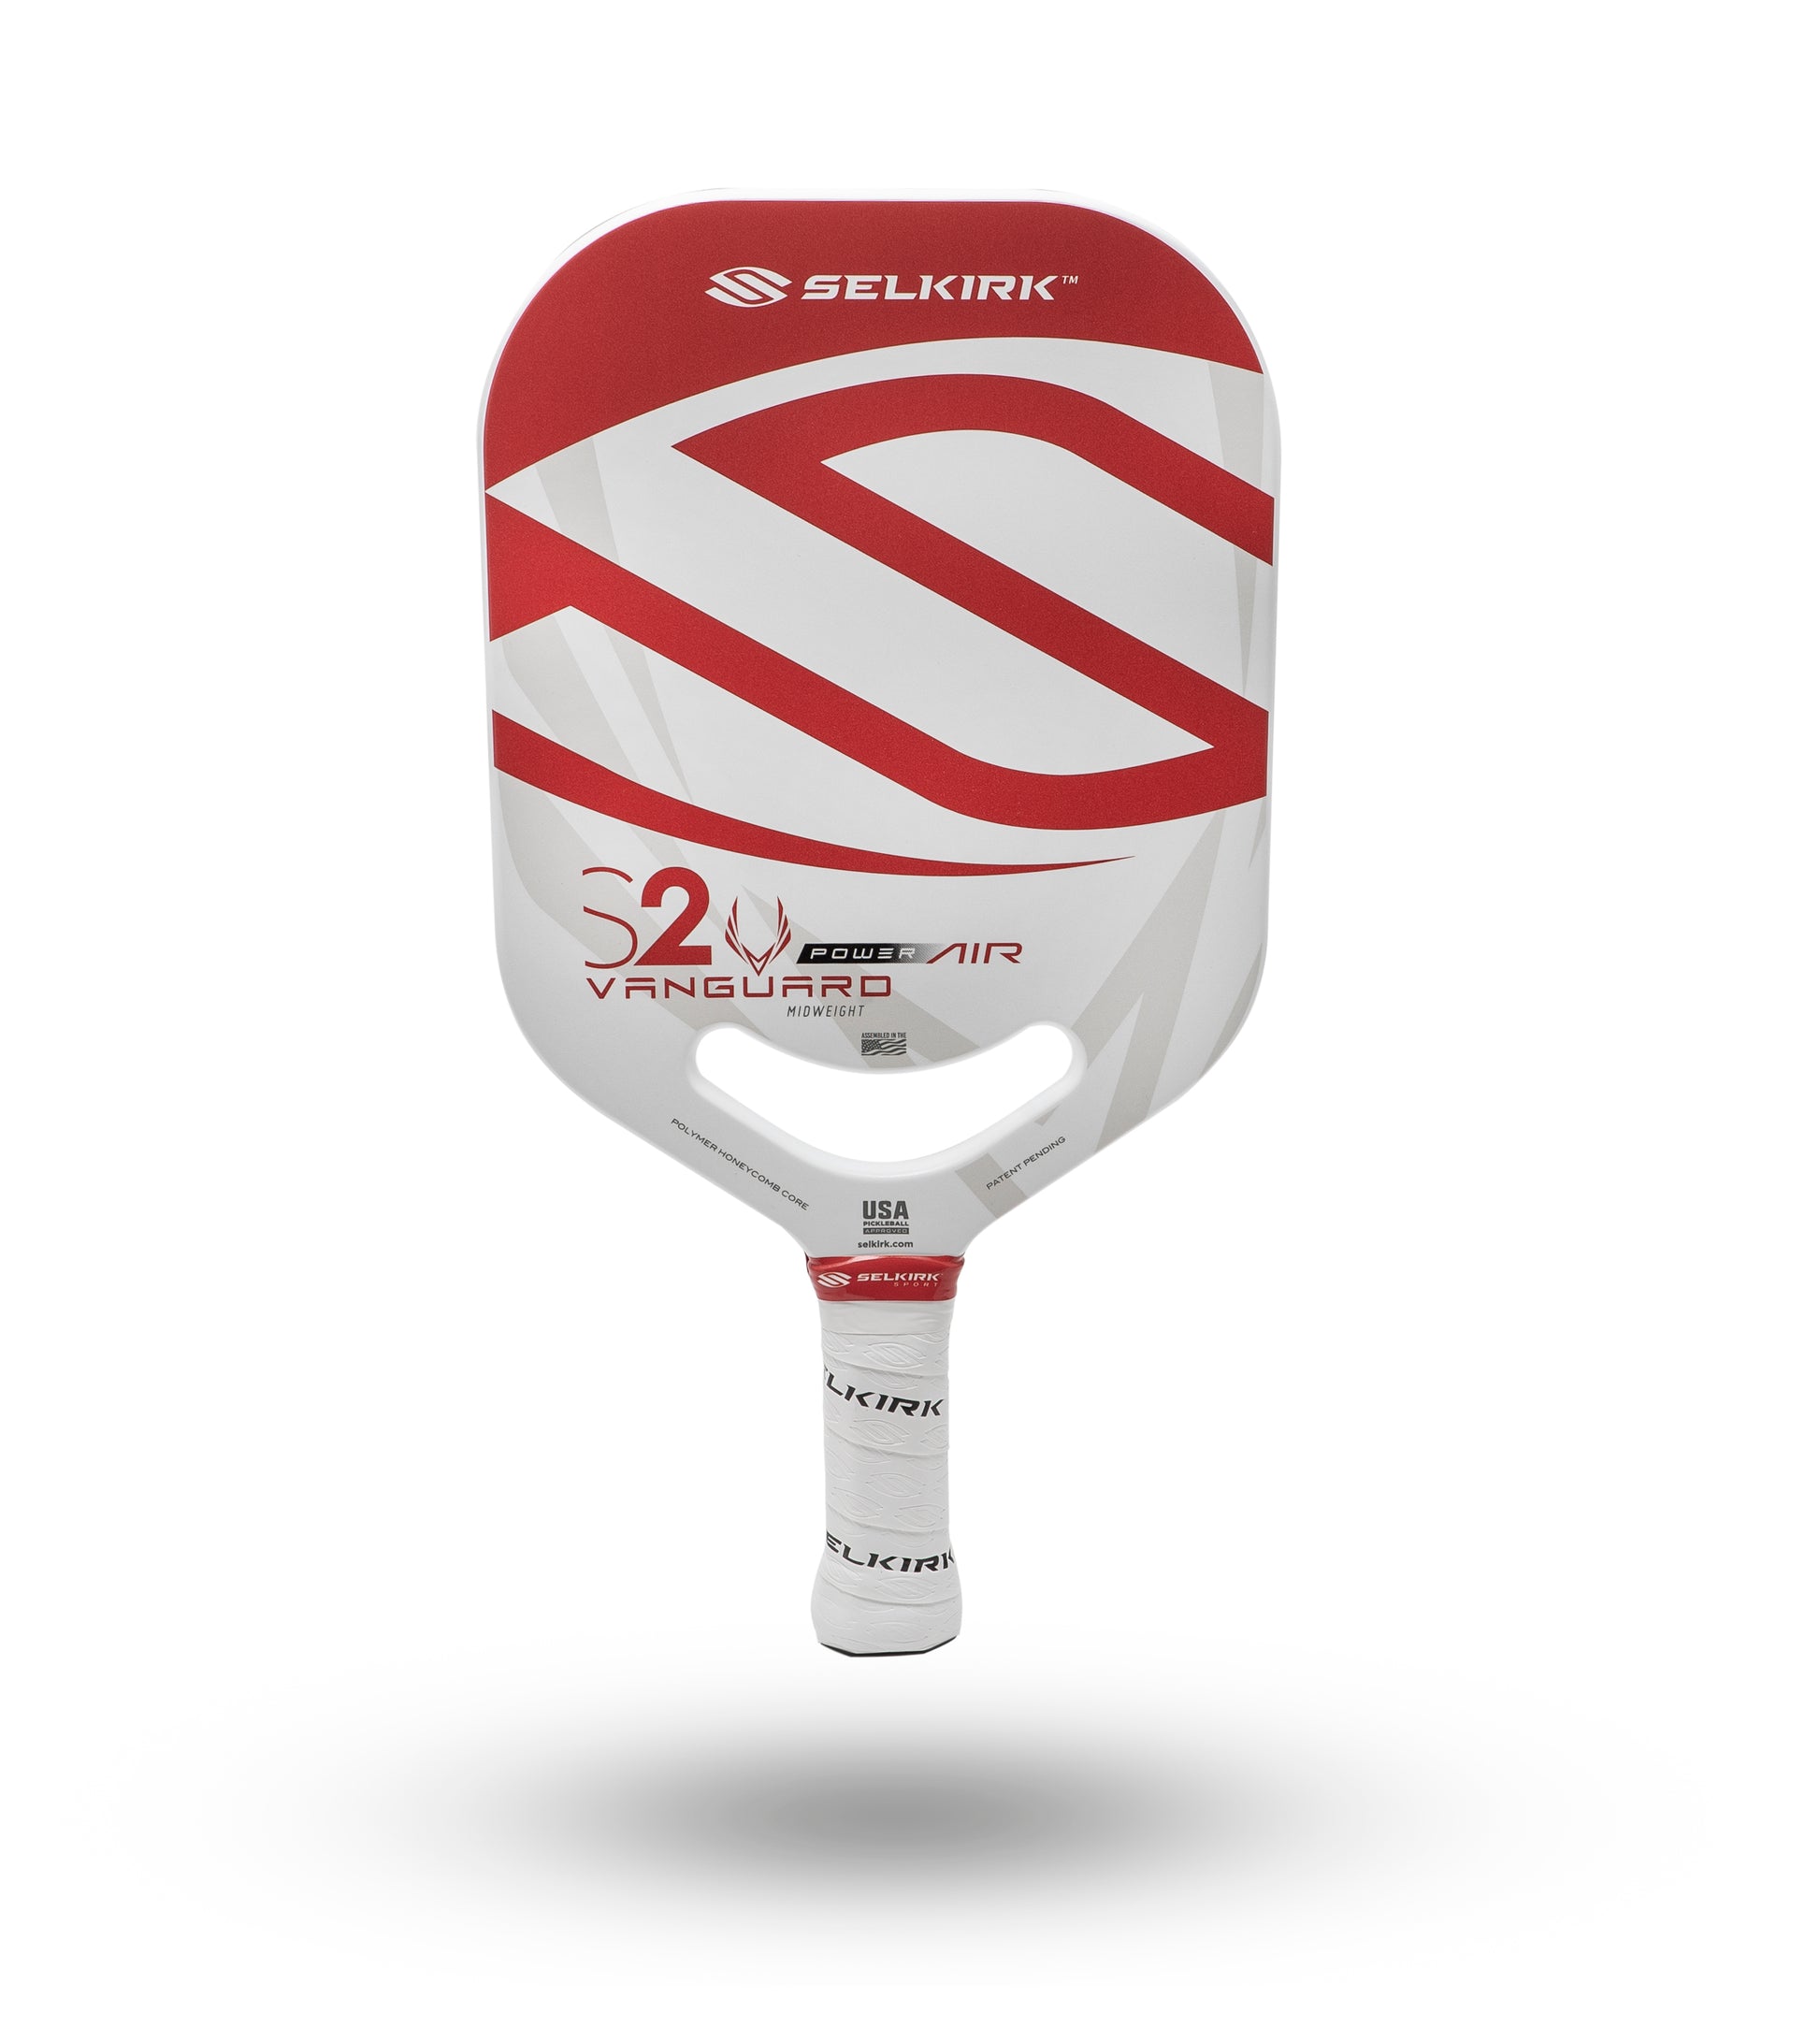 Selkirk Vanguard Power Air S2 Pickleball Paddle in red and white